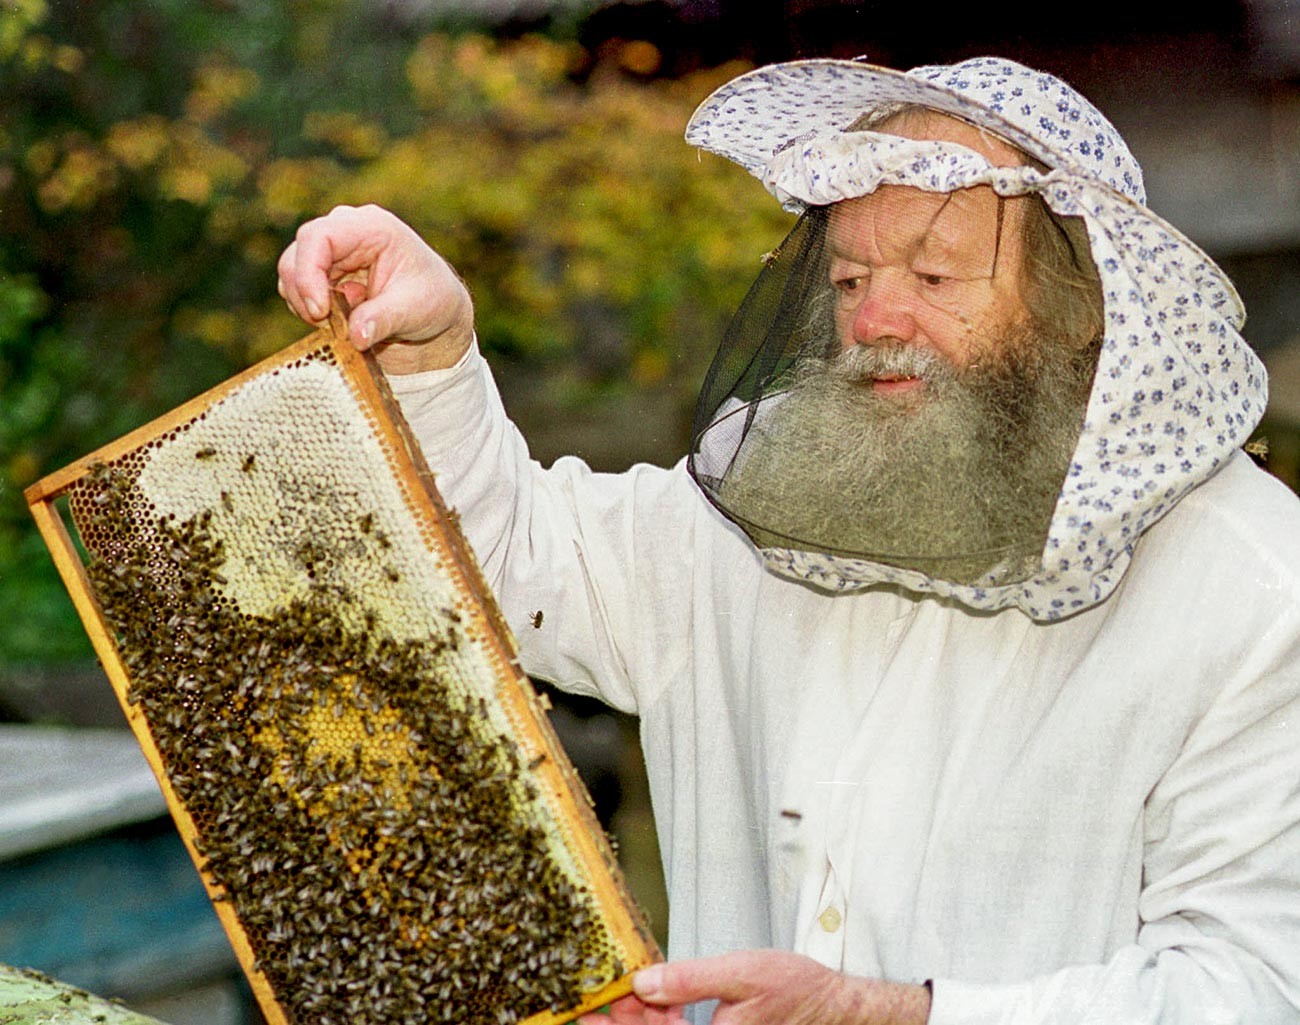 Producing honey is one of the oldest Russian crafts